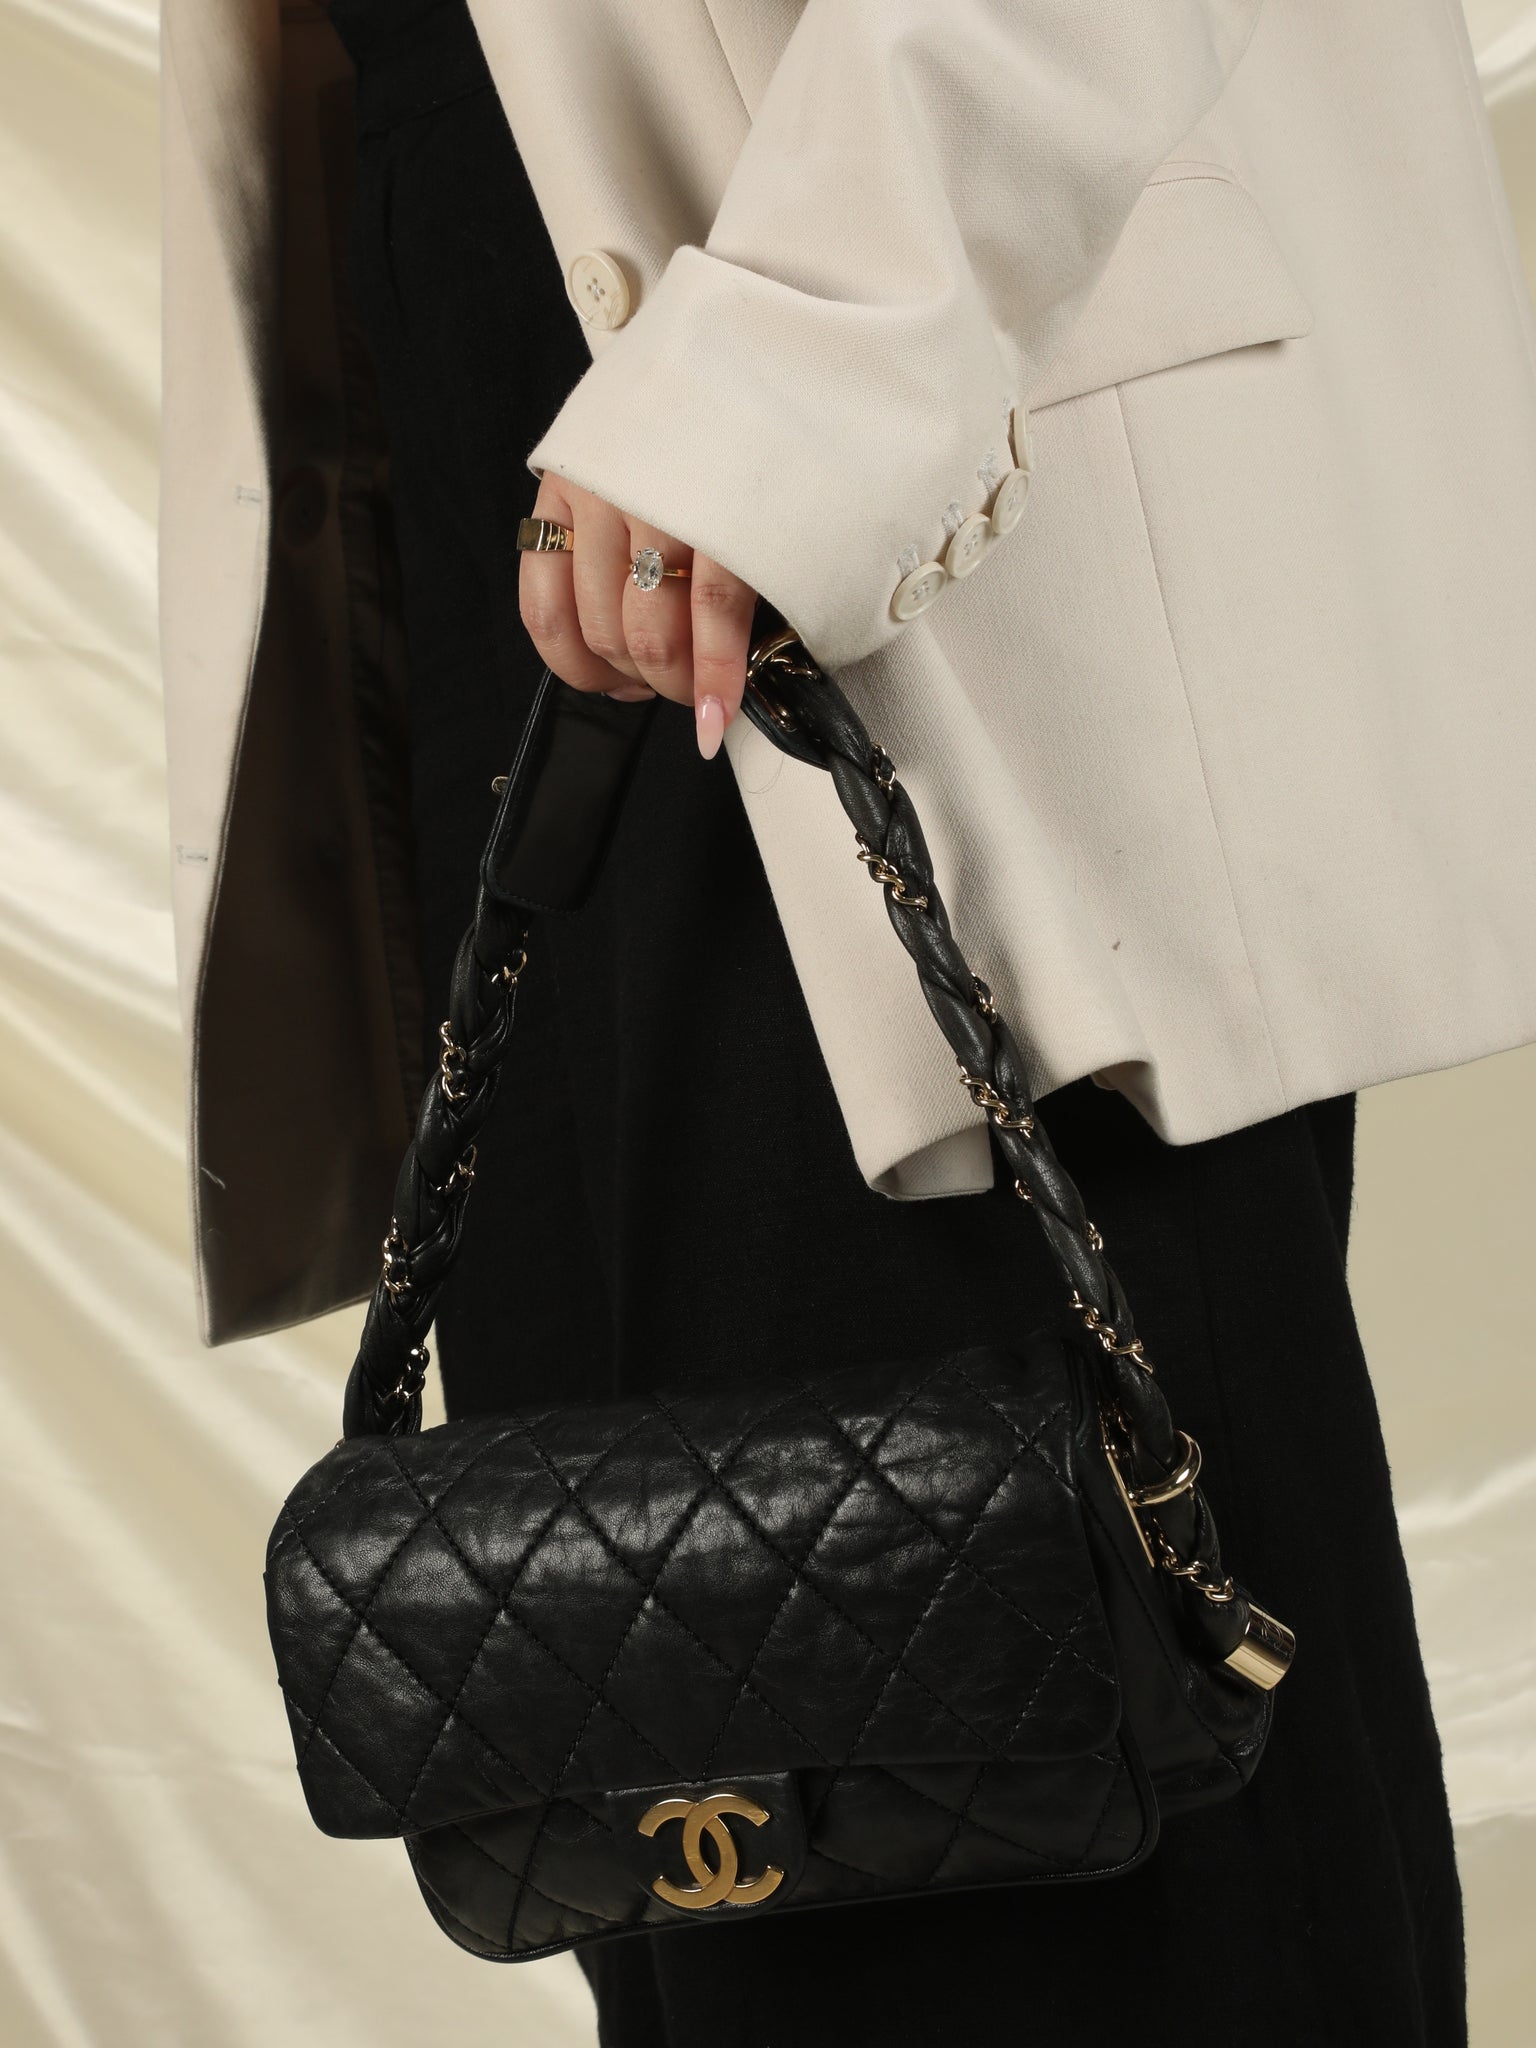 Chanel Black Quilted Distressed Leather Lady Braid Bowler Bag Chanel